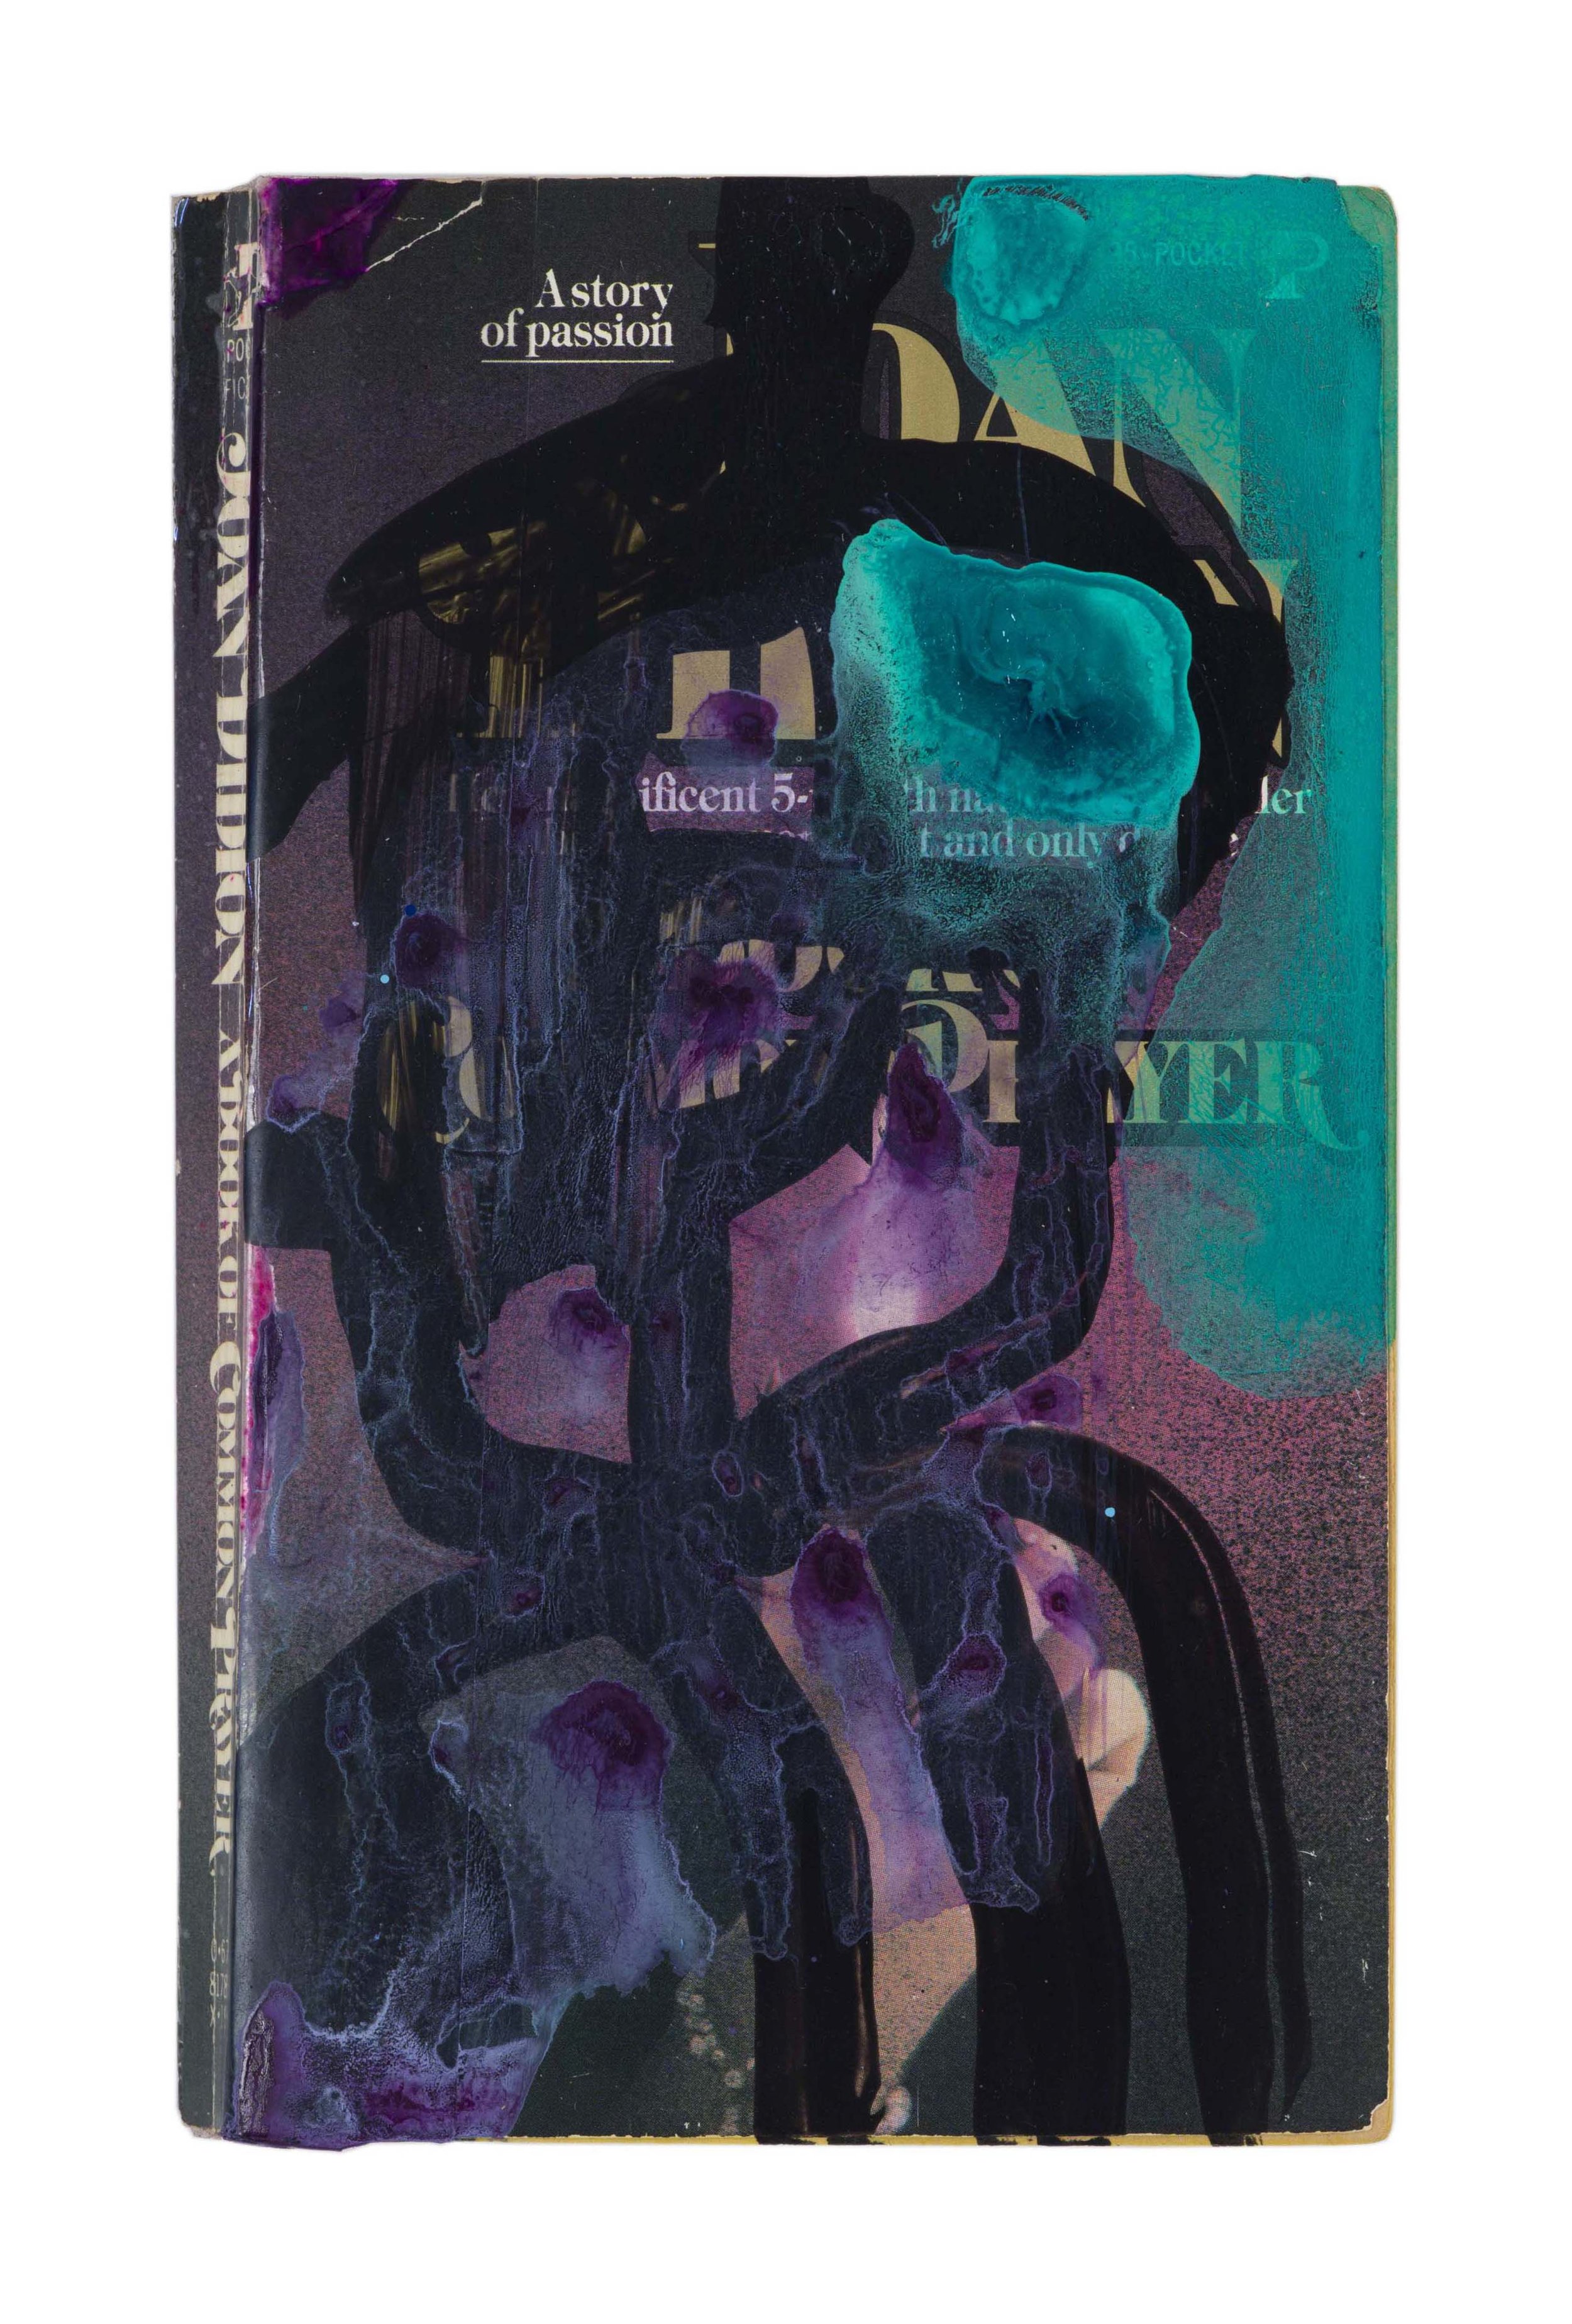  Drew Beattie and Ben Shepard  A Book of Common Prayer  acrylic and spray paint on used book 2016 7 x 4 ¼ inches 